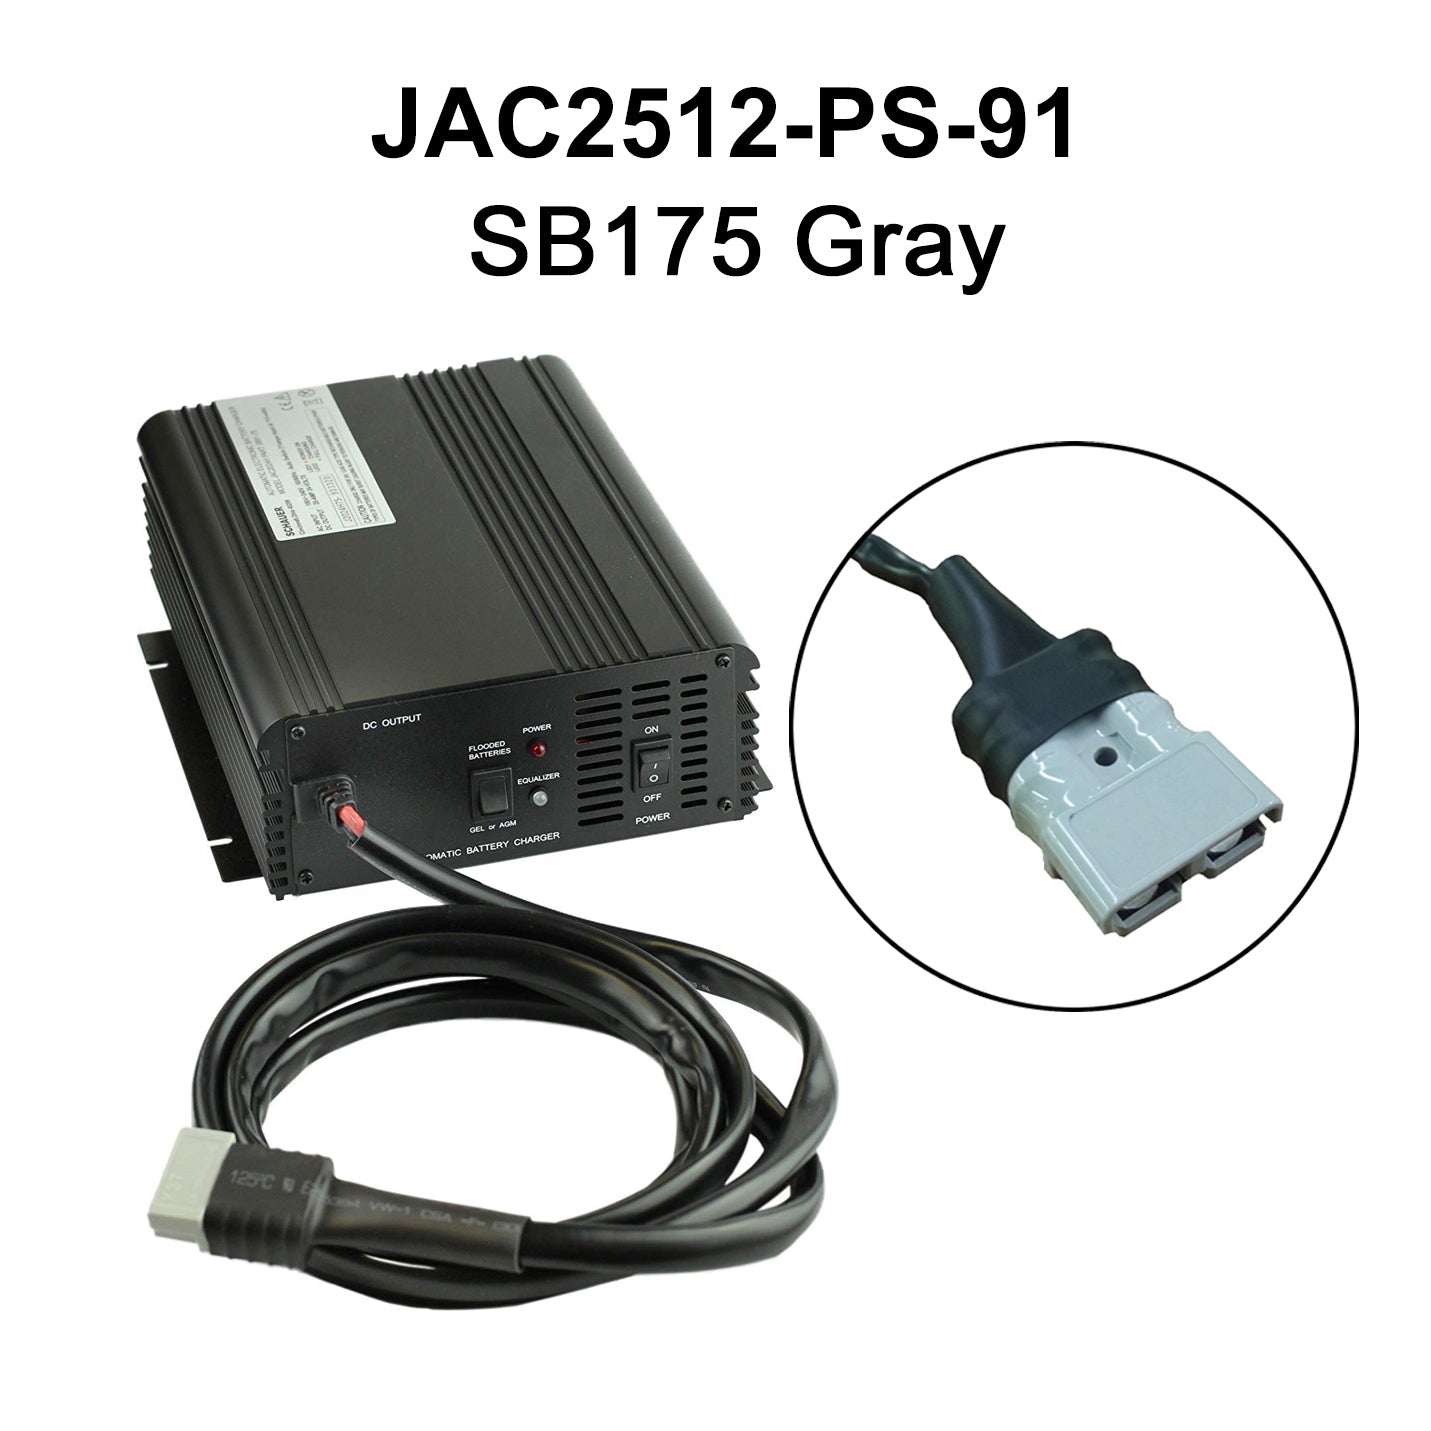 JAC2512-PS - Schauer 12V, 25A Power Supply & Intelligent Electronic Charger with Float/Maintenance Mode - Includes Choice of DC Connector